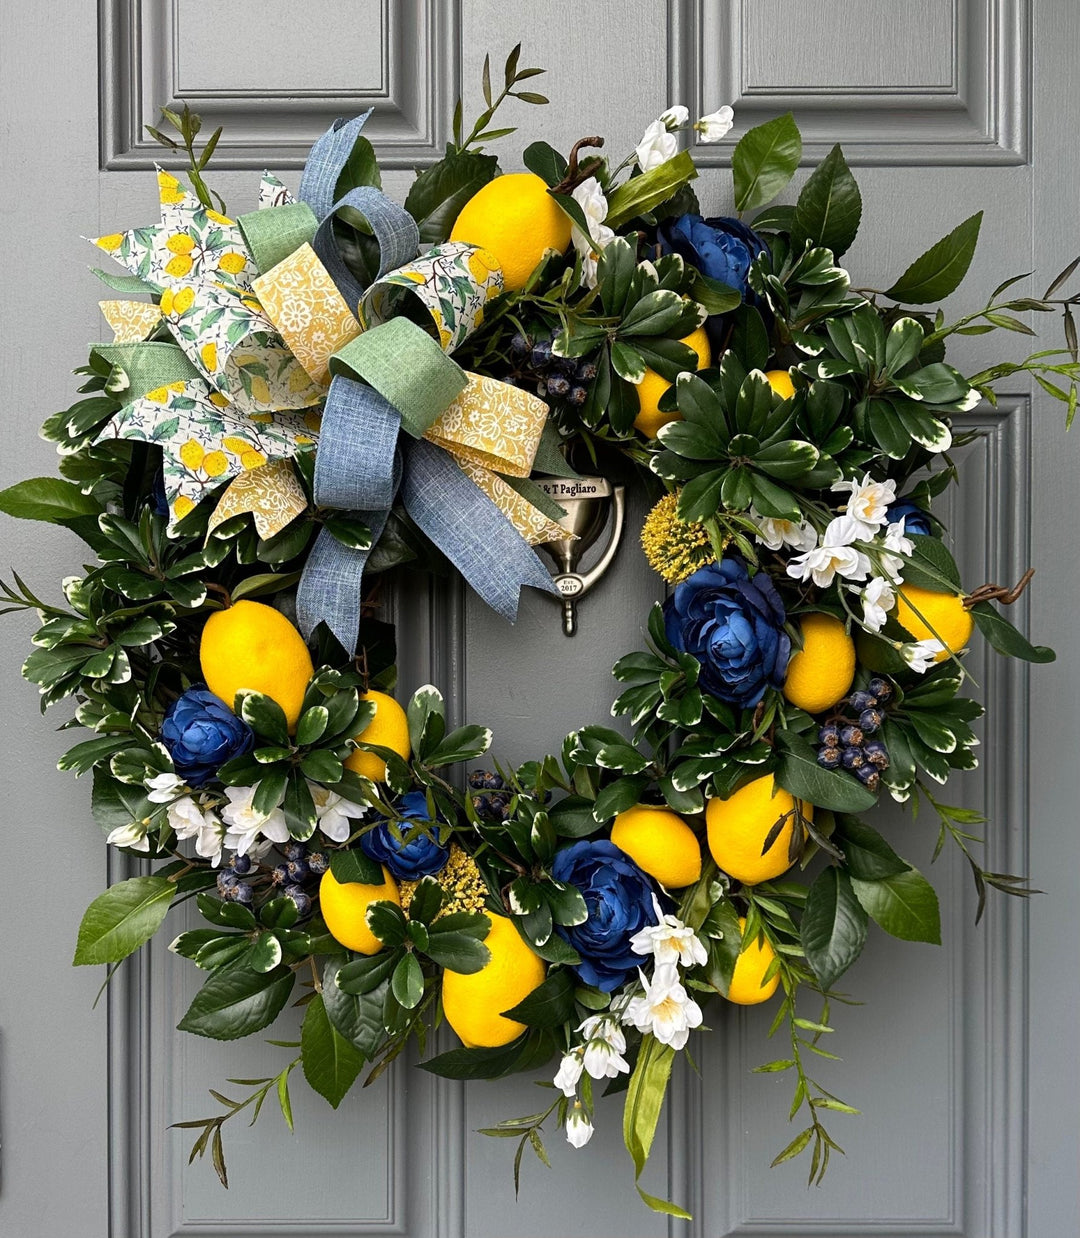 Summer lemon and blueberry wreath for front door